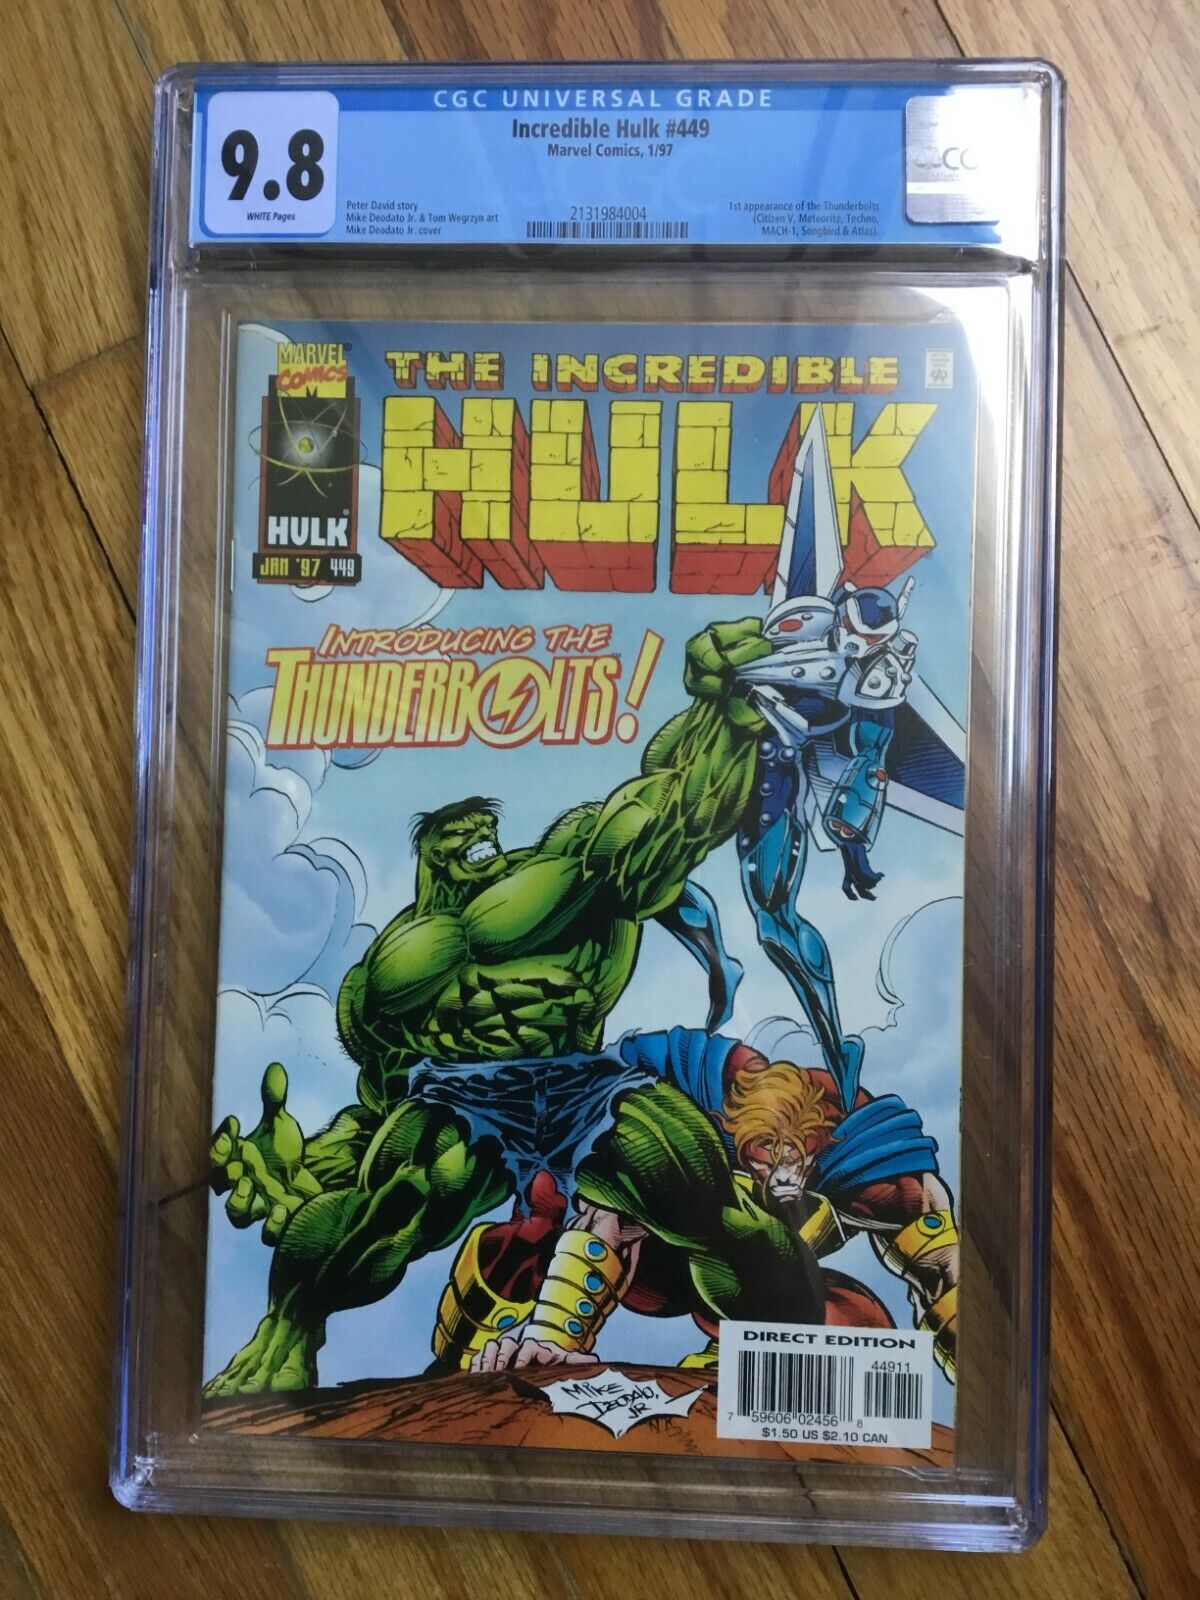 Incredible Hulk #449 CGC 9.8 White Pages - 1st Appearance of Thunderbolts HOT